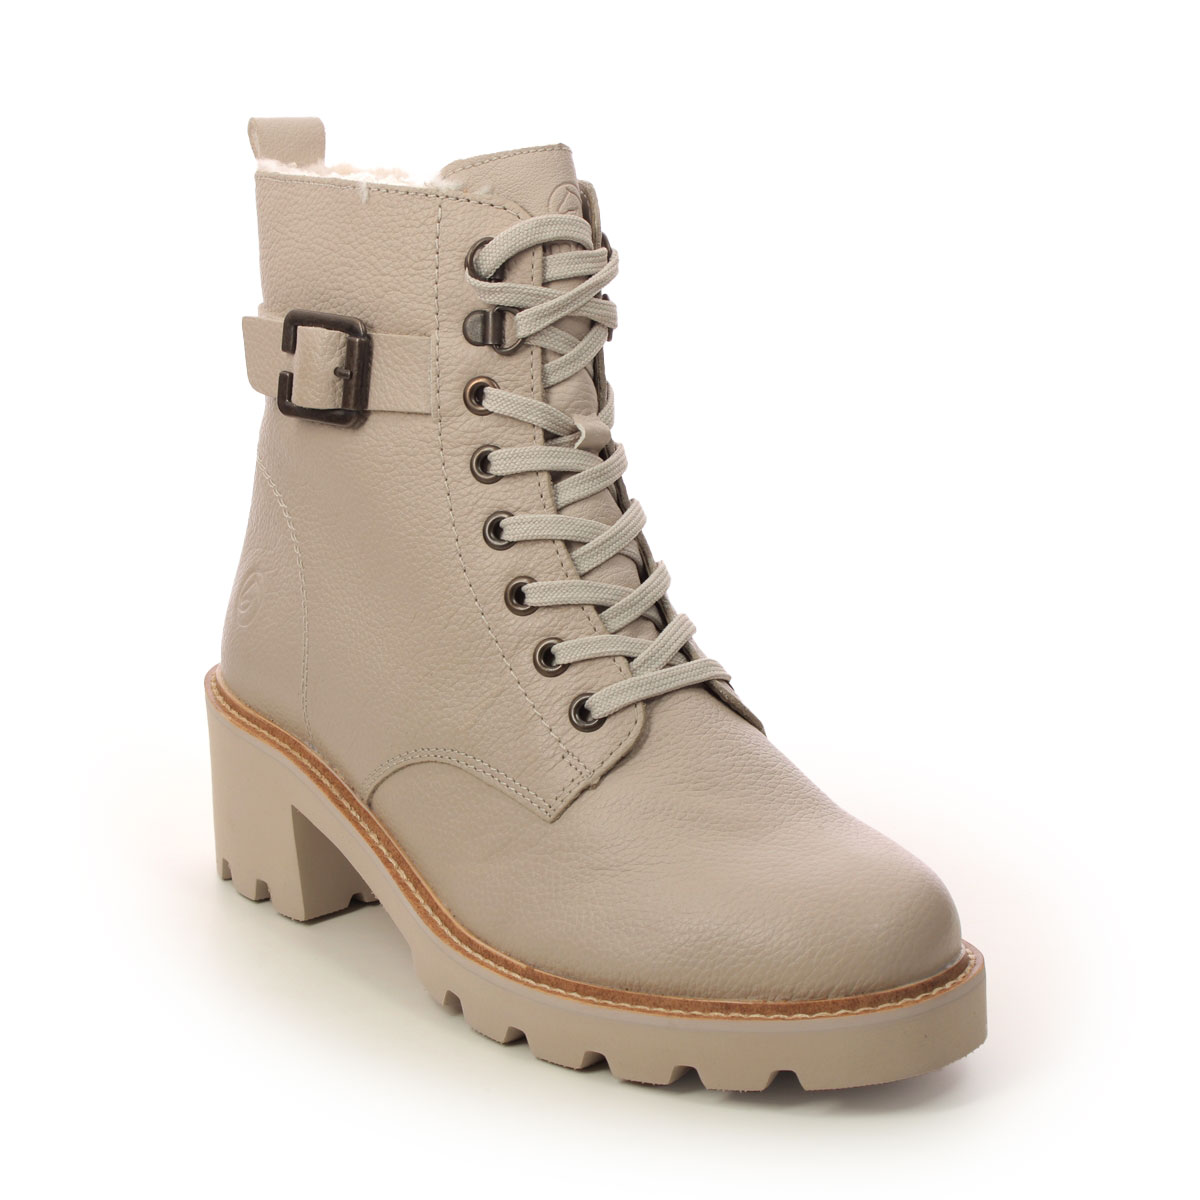 Remonte Bodola Beige Leather Womens Lace Up Boots D0A74-60 In Size 41 In Plain Beige Leather